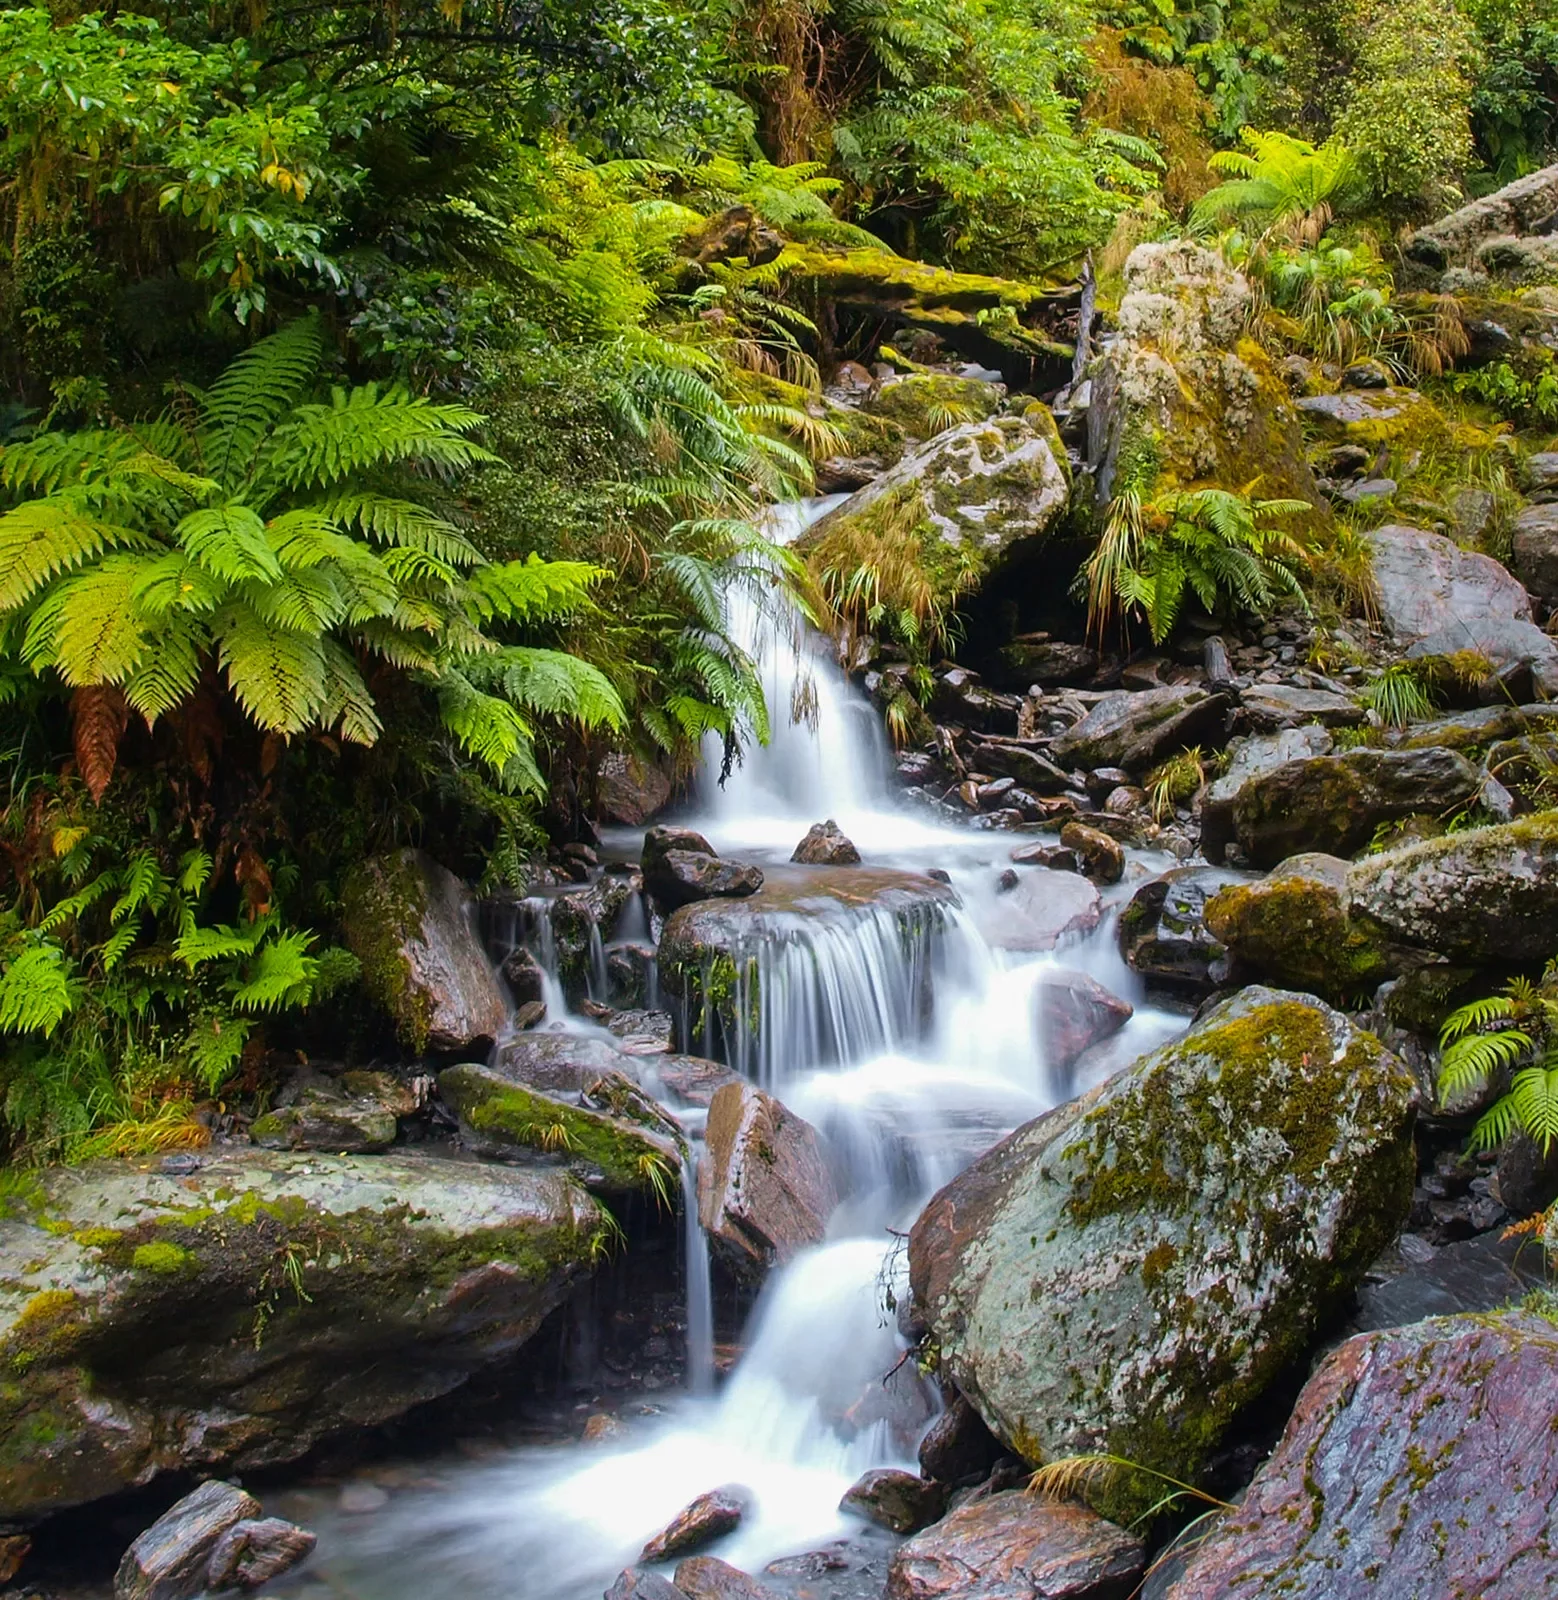 Waterfall Long Exposure image in Lush Temperate Rainforest on the West Coast of Tasmania.